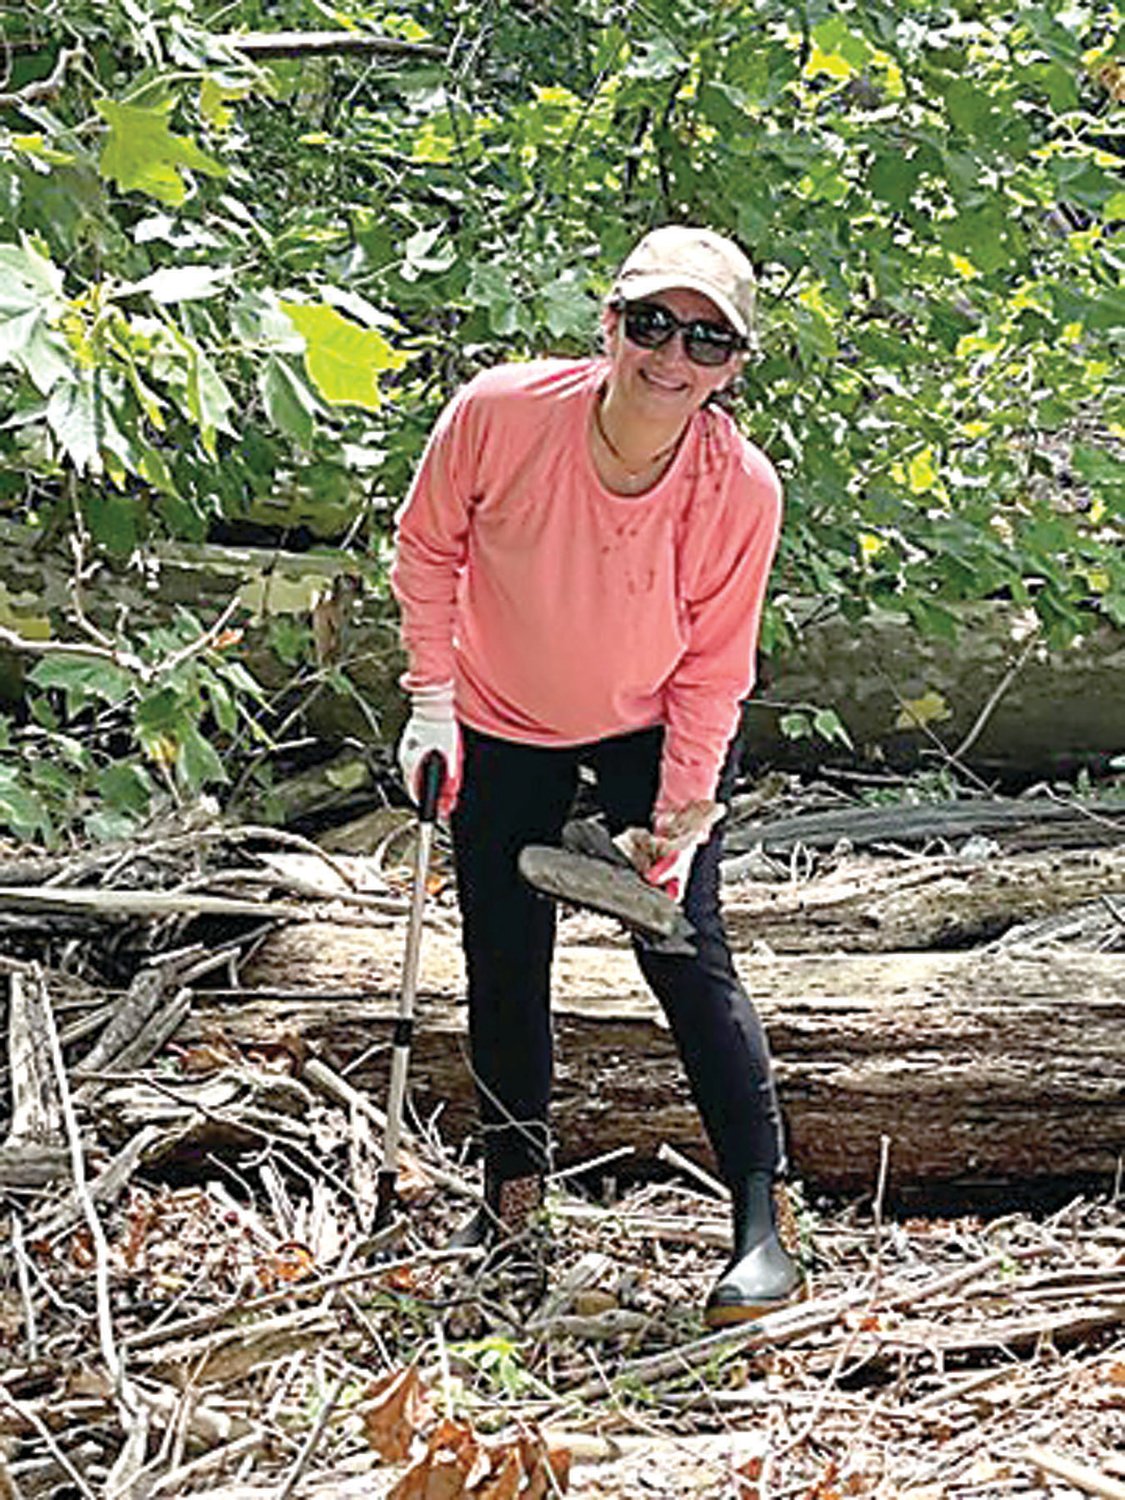 Spearhead Project Earth Head of Global Sustainability Strategies Patricia Burguete pitches in to help with a trial Burlington Island cleanup last year.